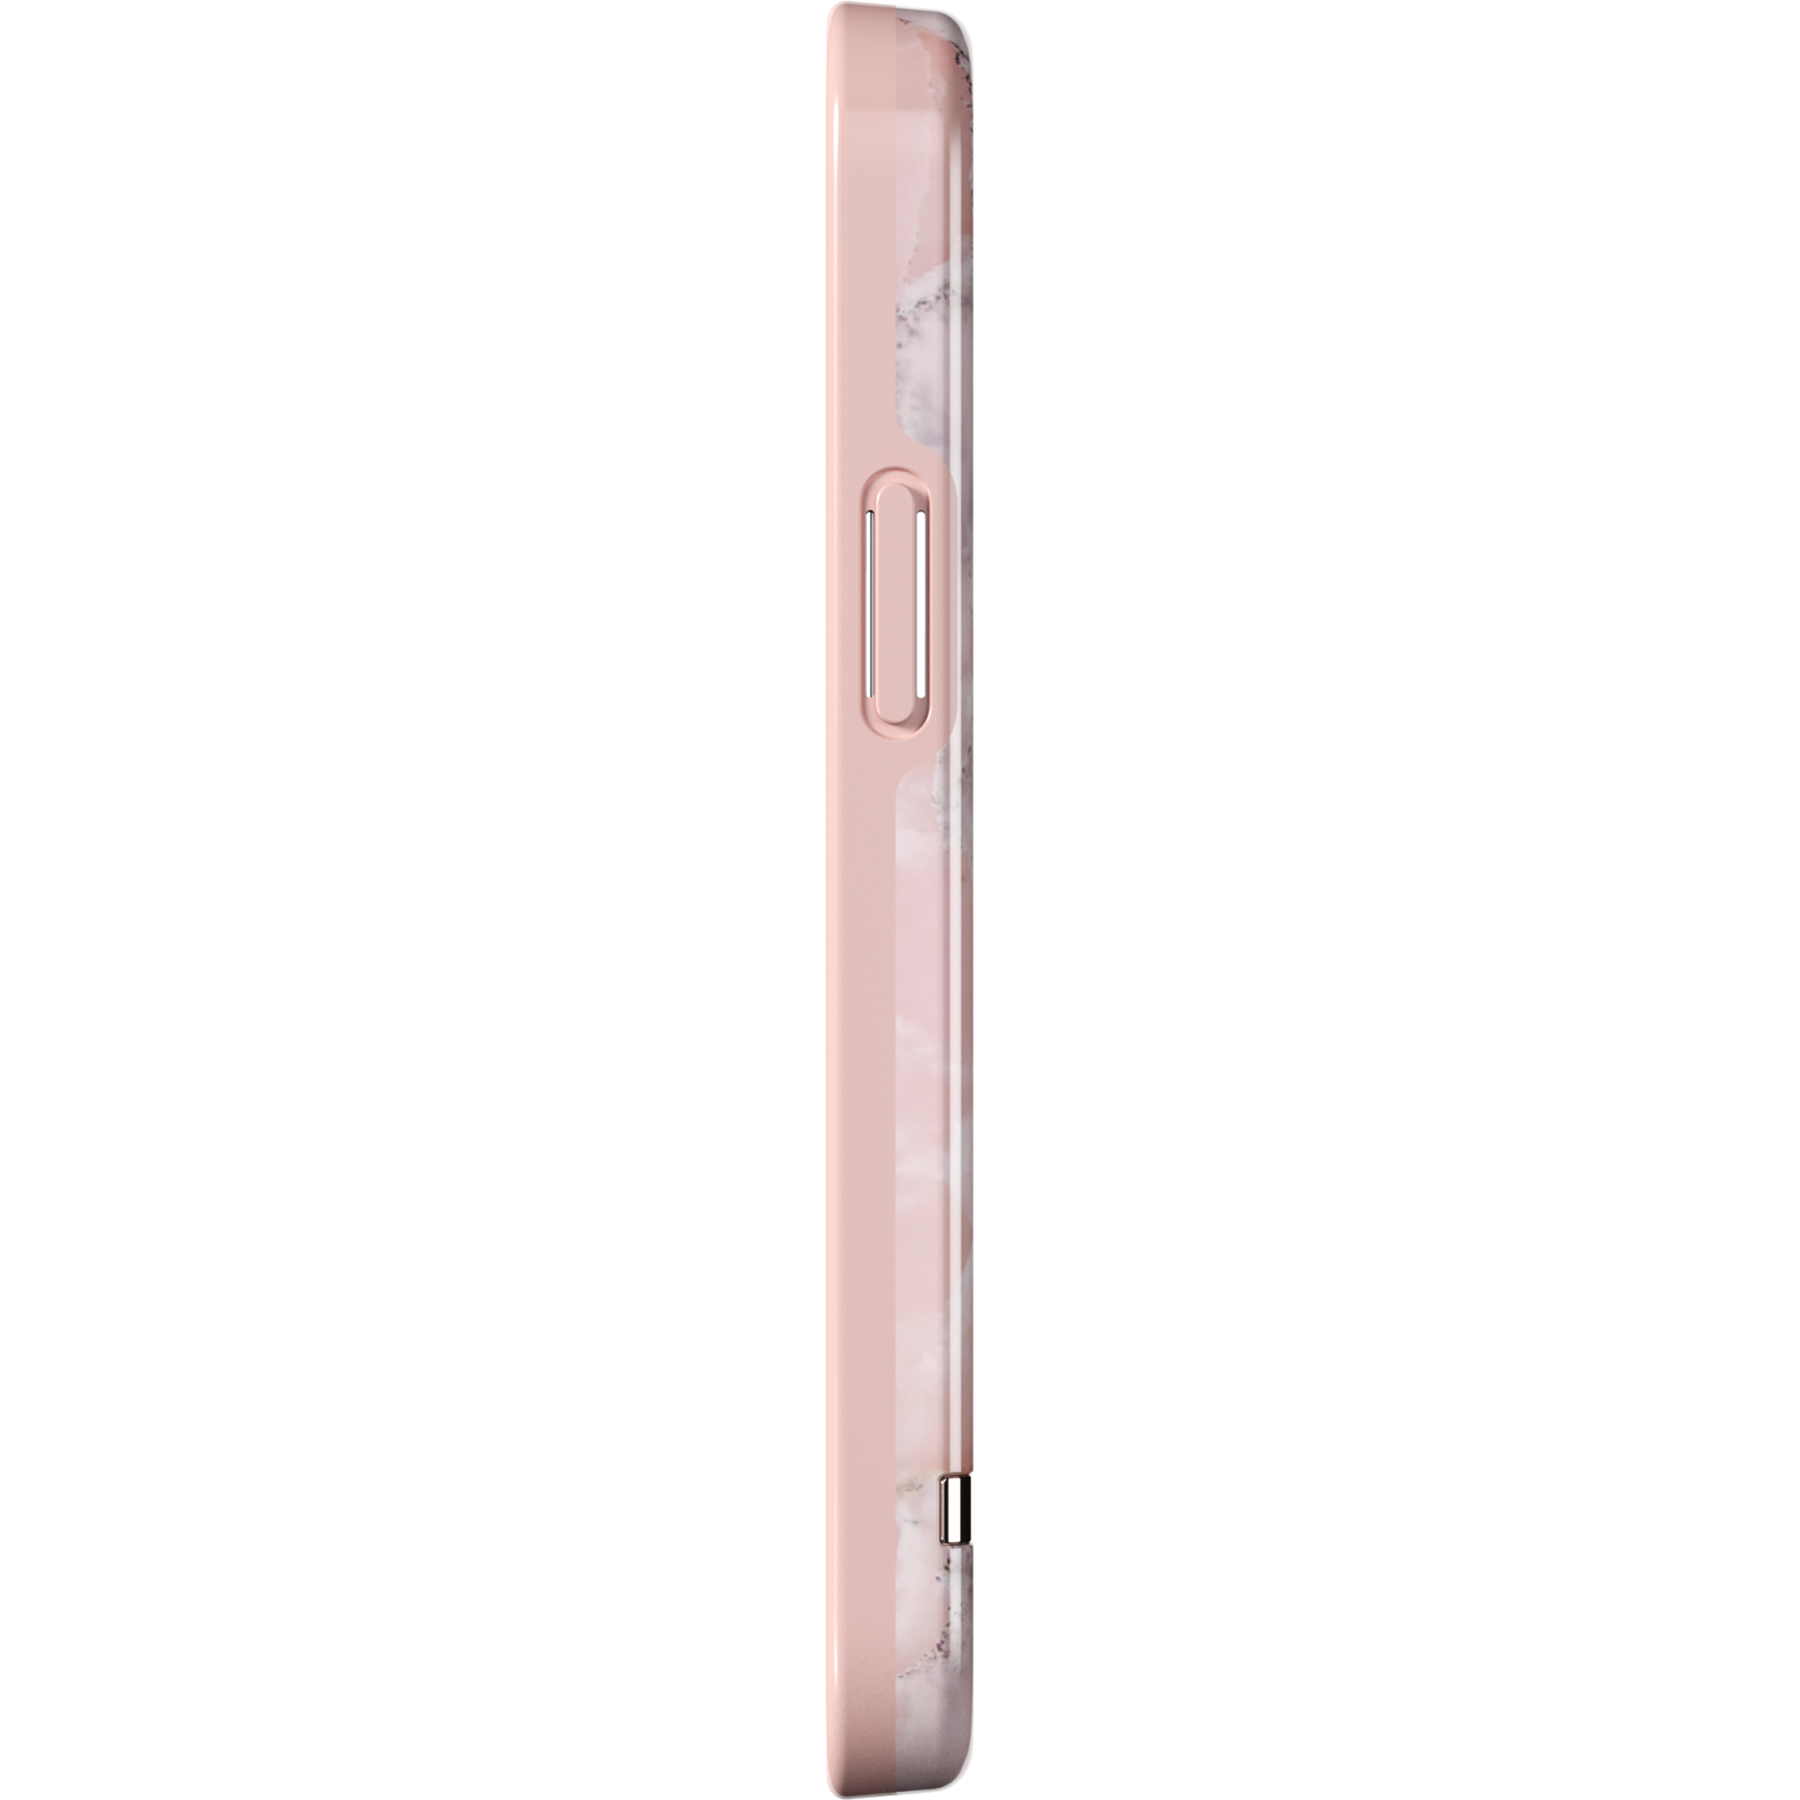 Coque iPhone 12 Mini Pink Marble